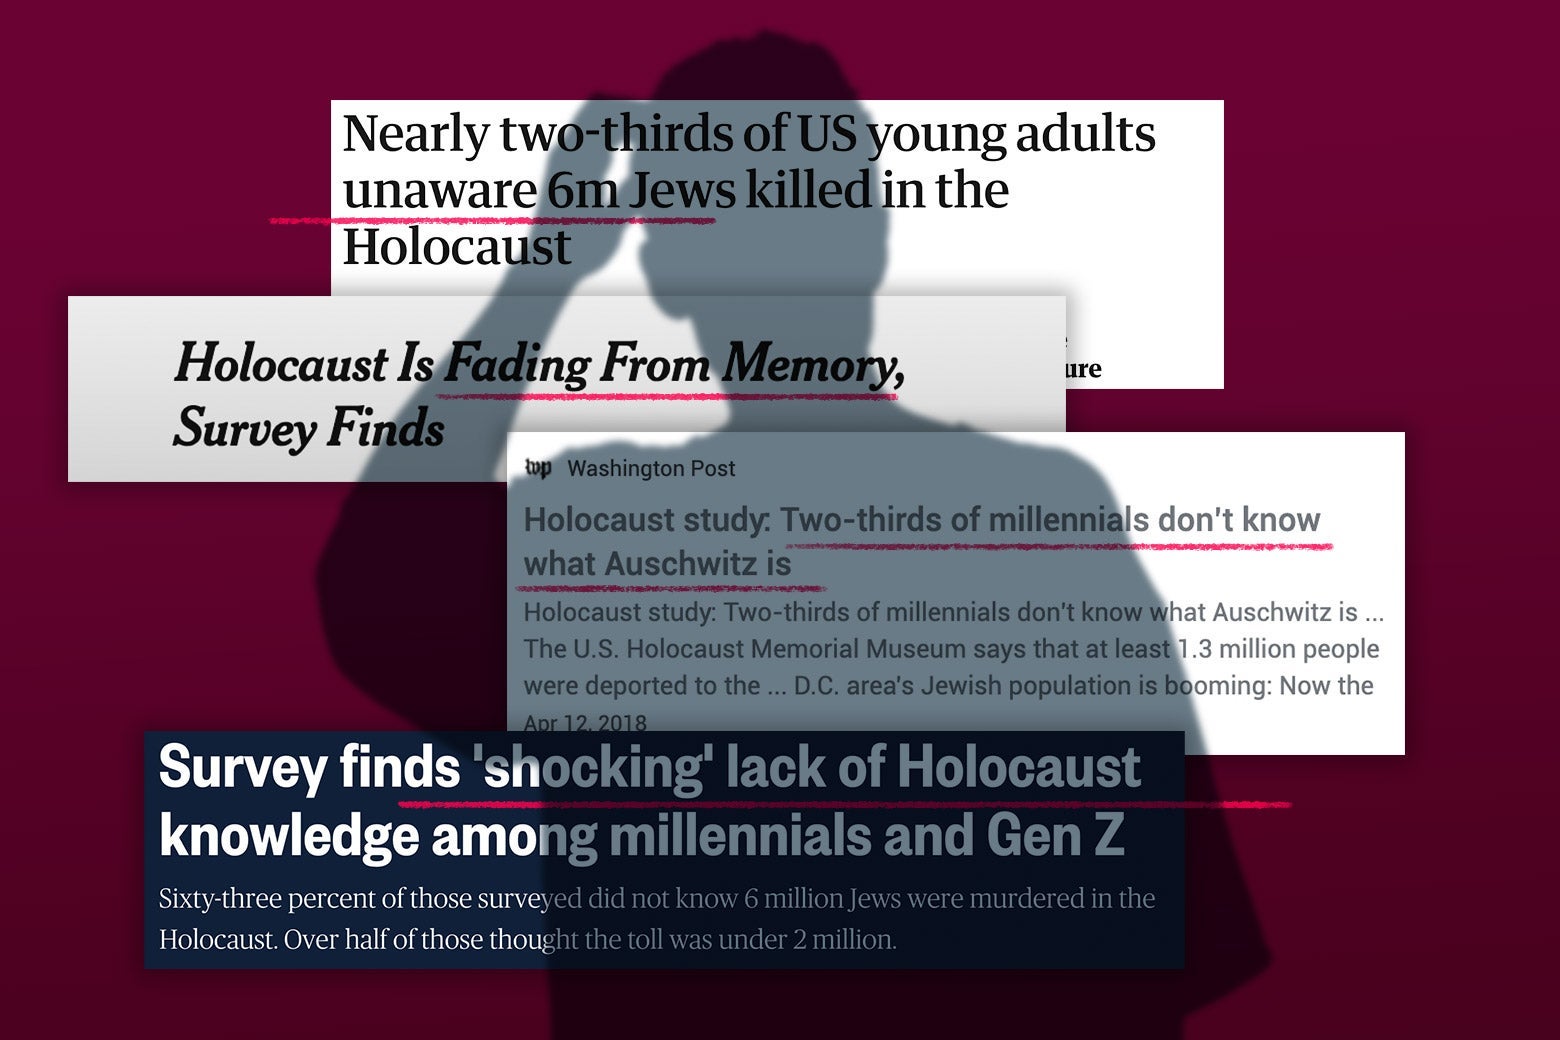 A shadow of a person scratching their head is cast over headlines about Holocaust knowledge statistics.